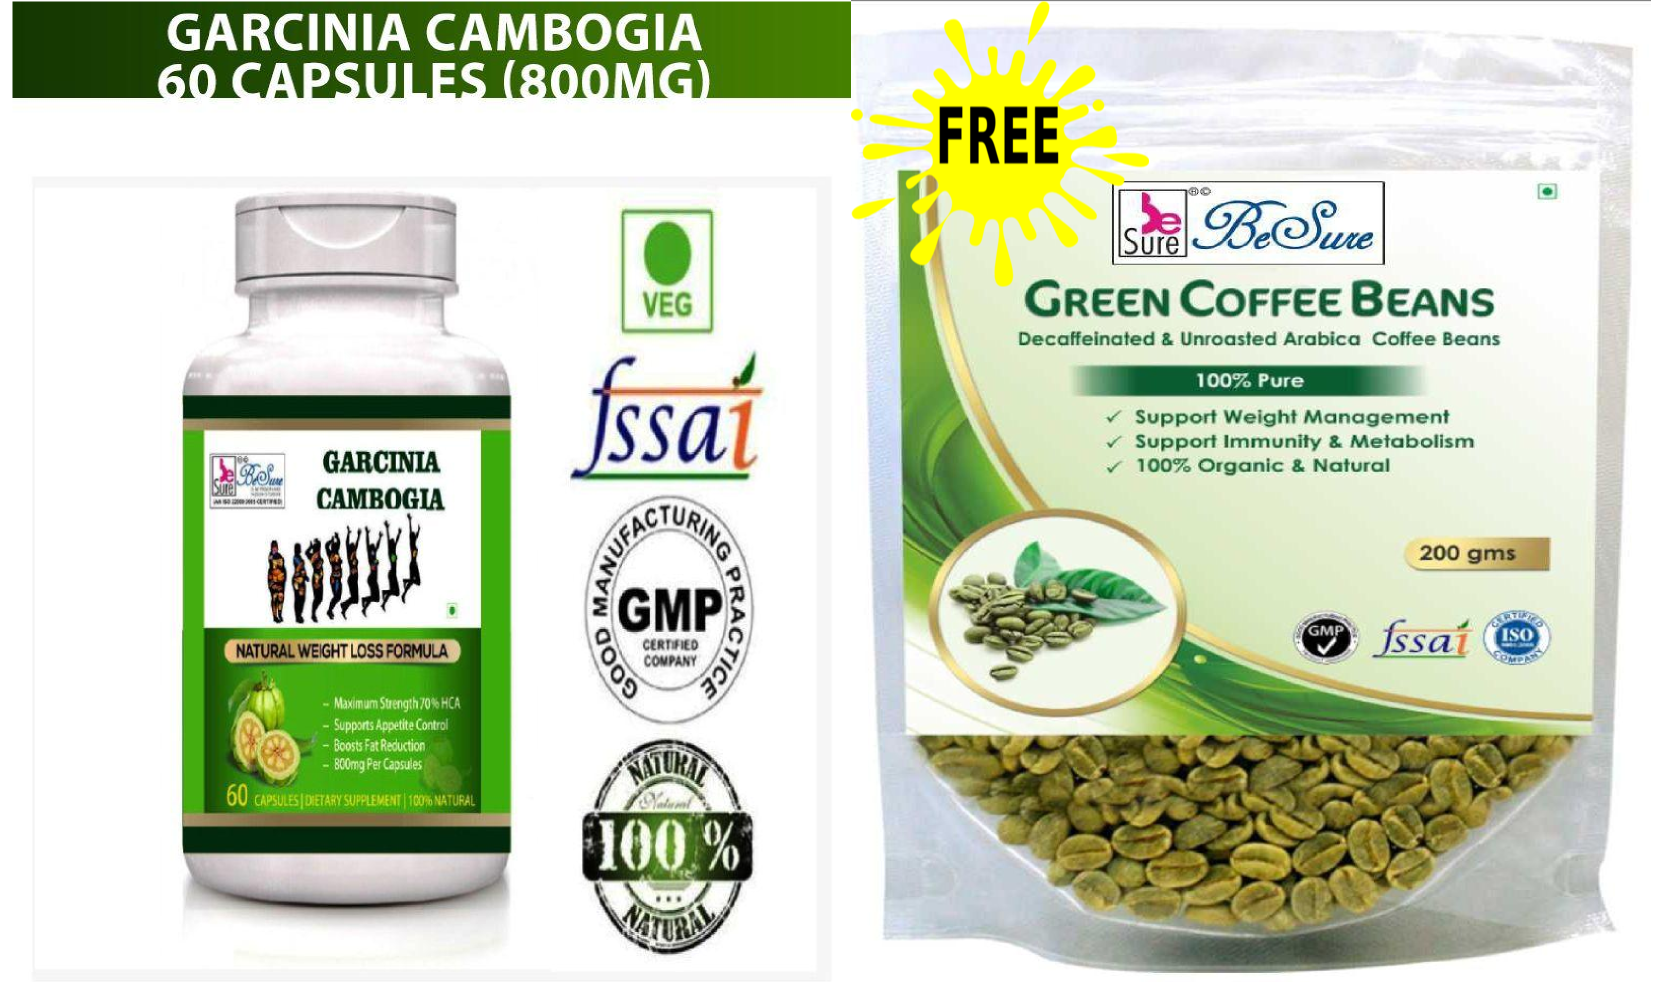     			BeSure Garcinia Cambogia 60 Caps-Green Coffee Beans Free 800 mg Unflavoured